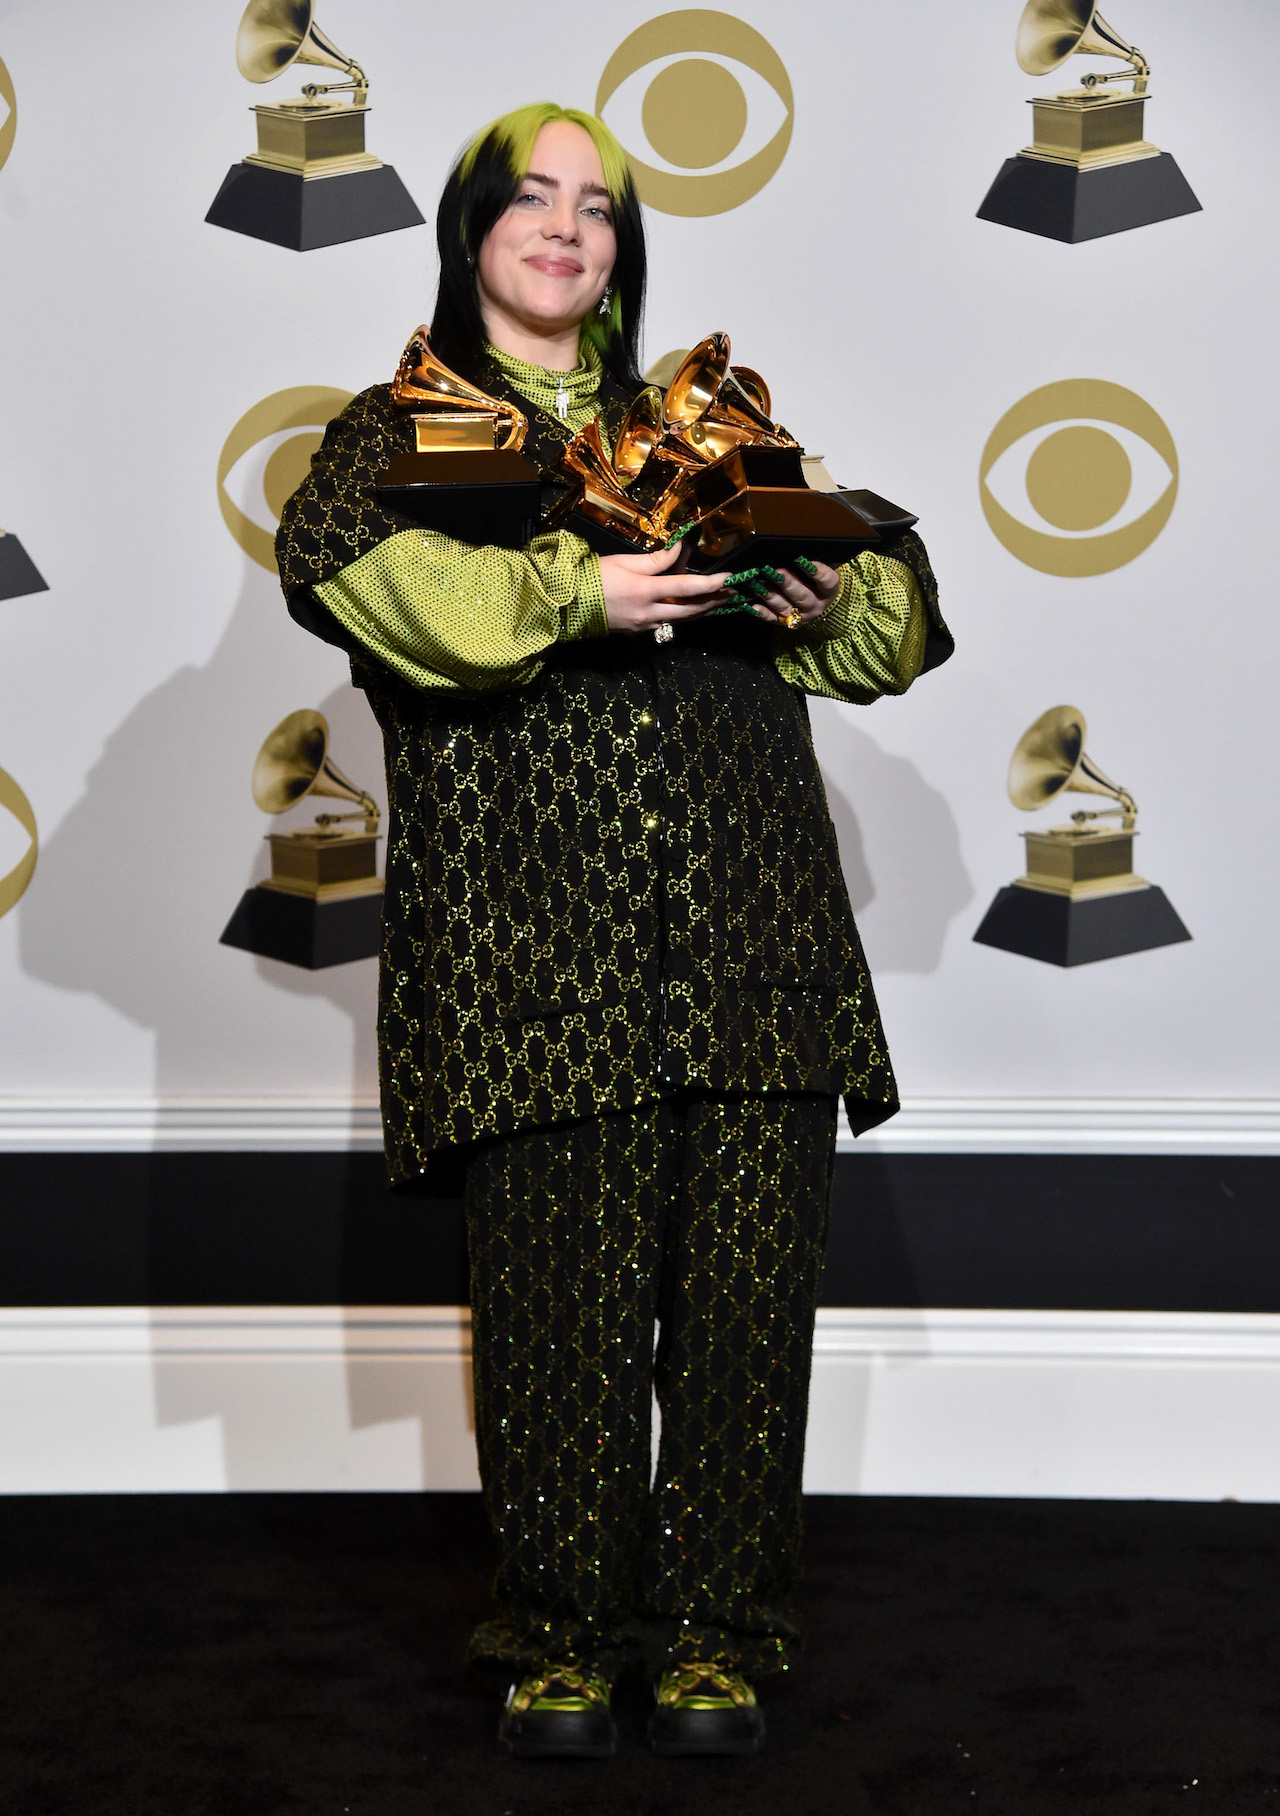 LOS ANGELES, CALIFORNIA – JANUARY 26: Billie Eilish, winner of Record of the Year for 